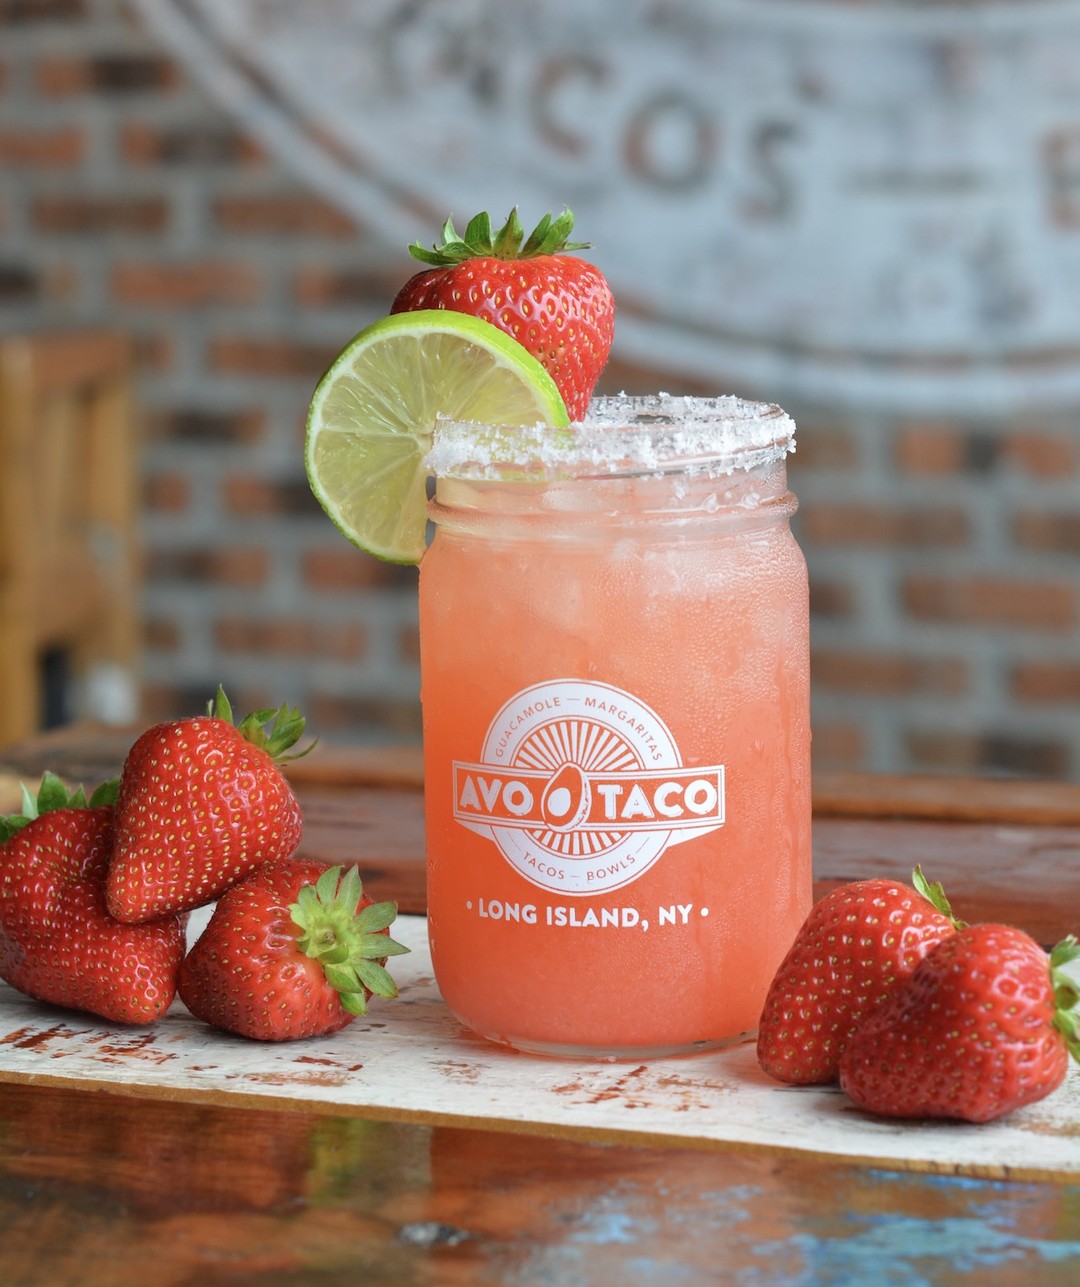 I wonder if there's a margarita out there thinking about me, too?! ❤️
Happy National Tequila Day to all our margarita lovers! 🥑🌮
📸 Featured: Strawberry Margarita 🍓

 #summer #summerfun #marg #margarita #tequila #tequiladay #cocktails #lifood #lifoods #tacos